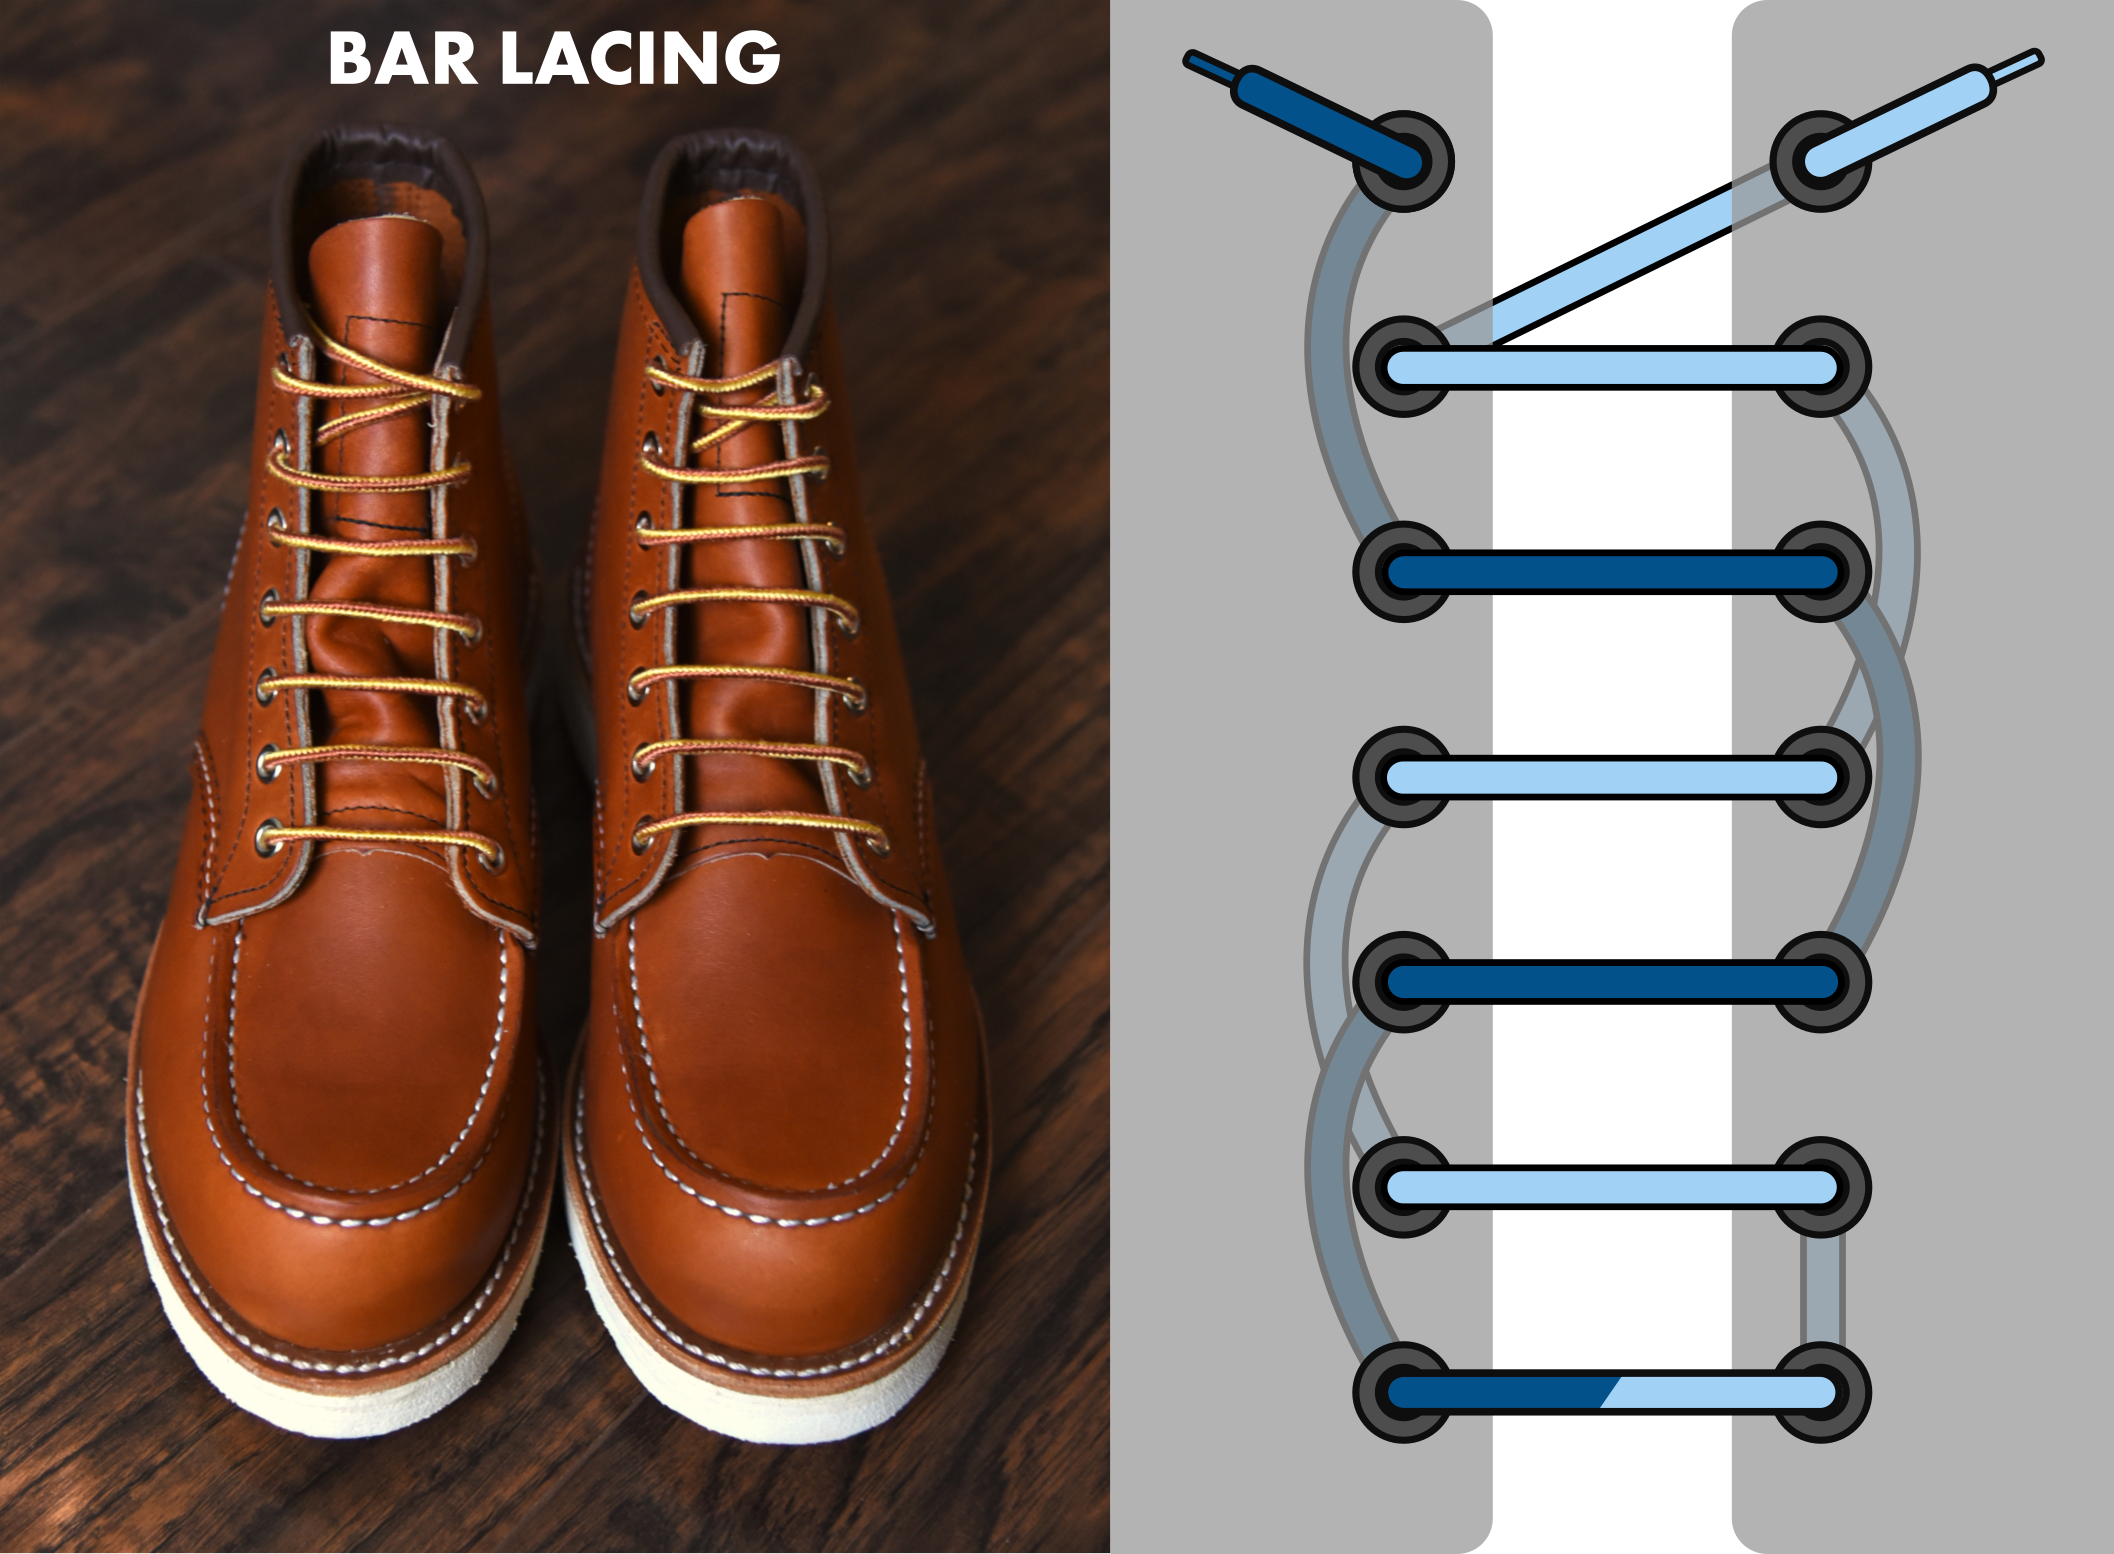 Straight or Bar lacing diagram for boots